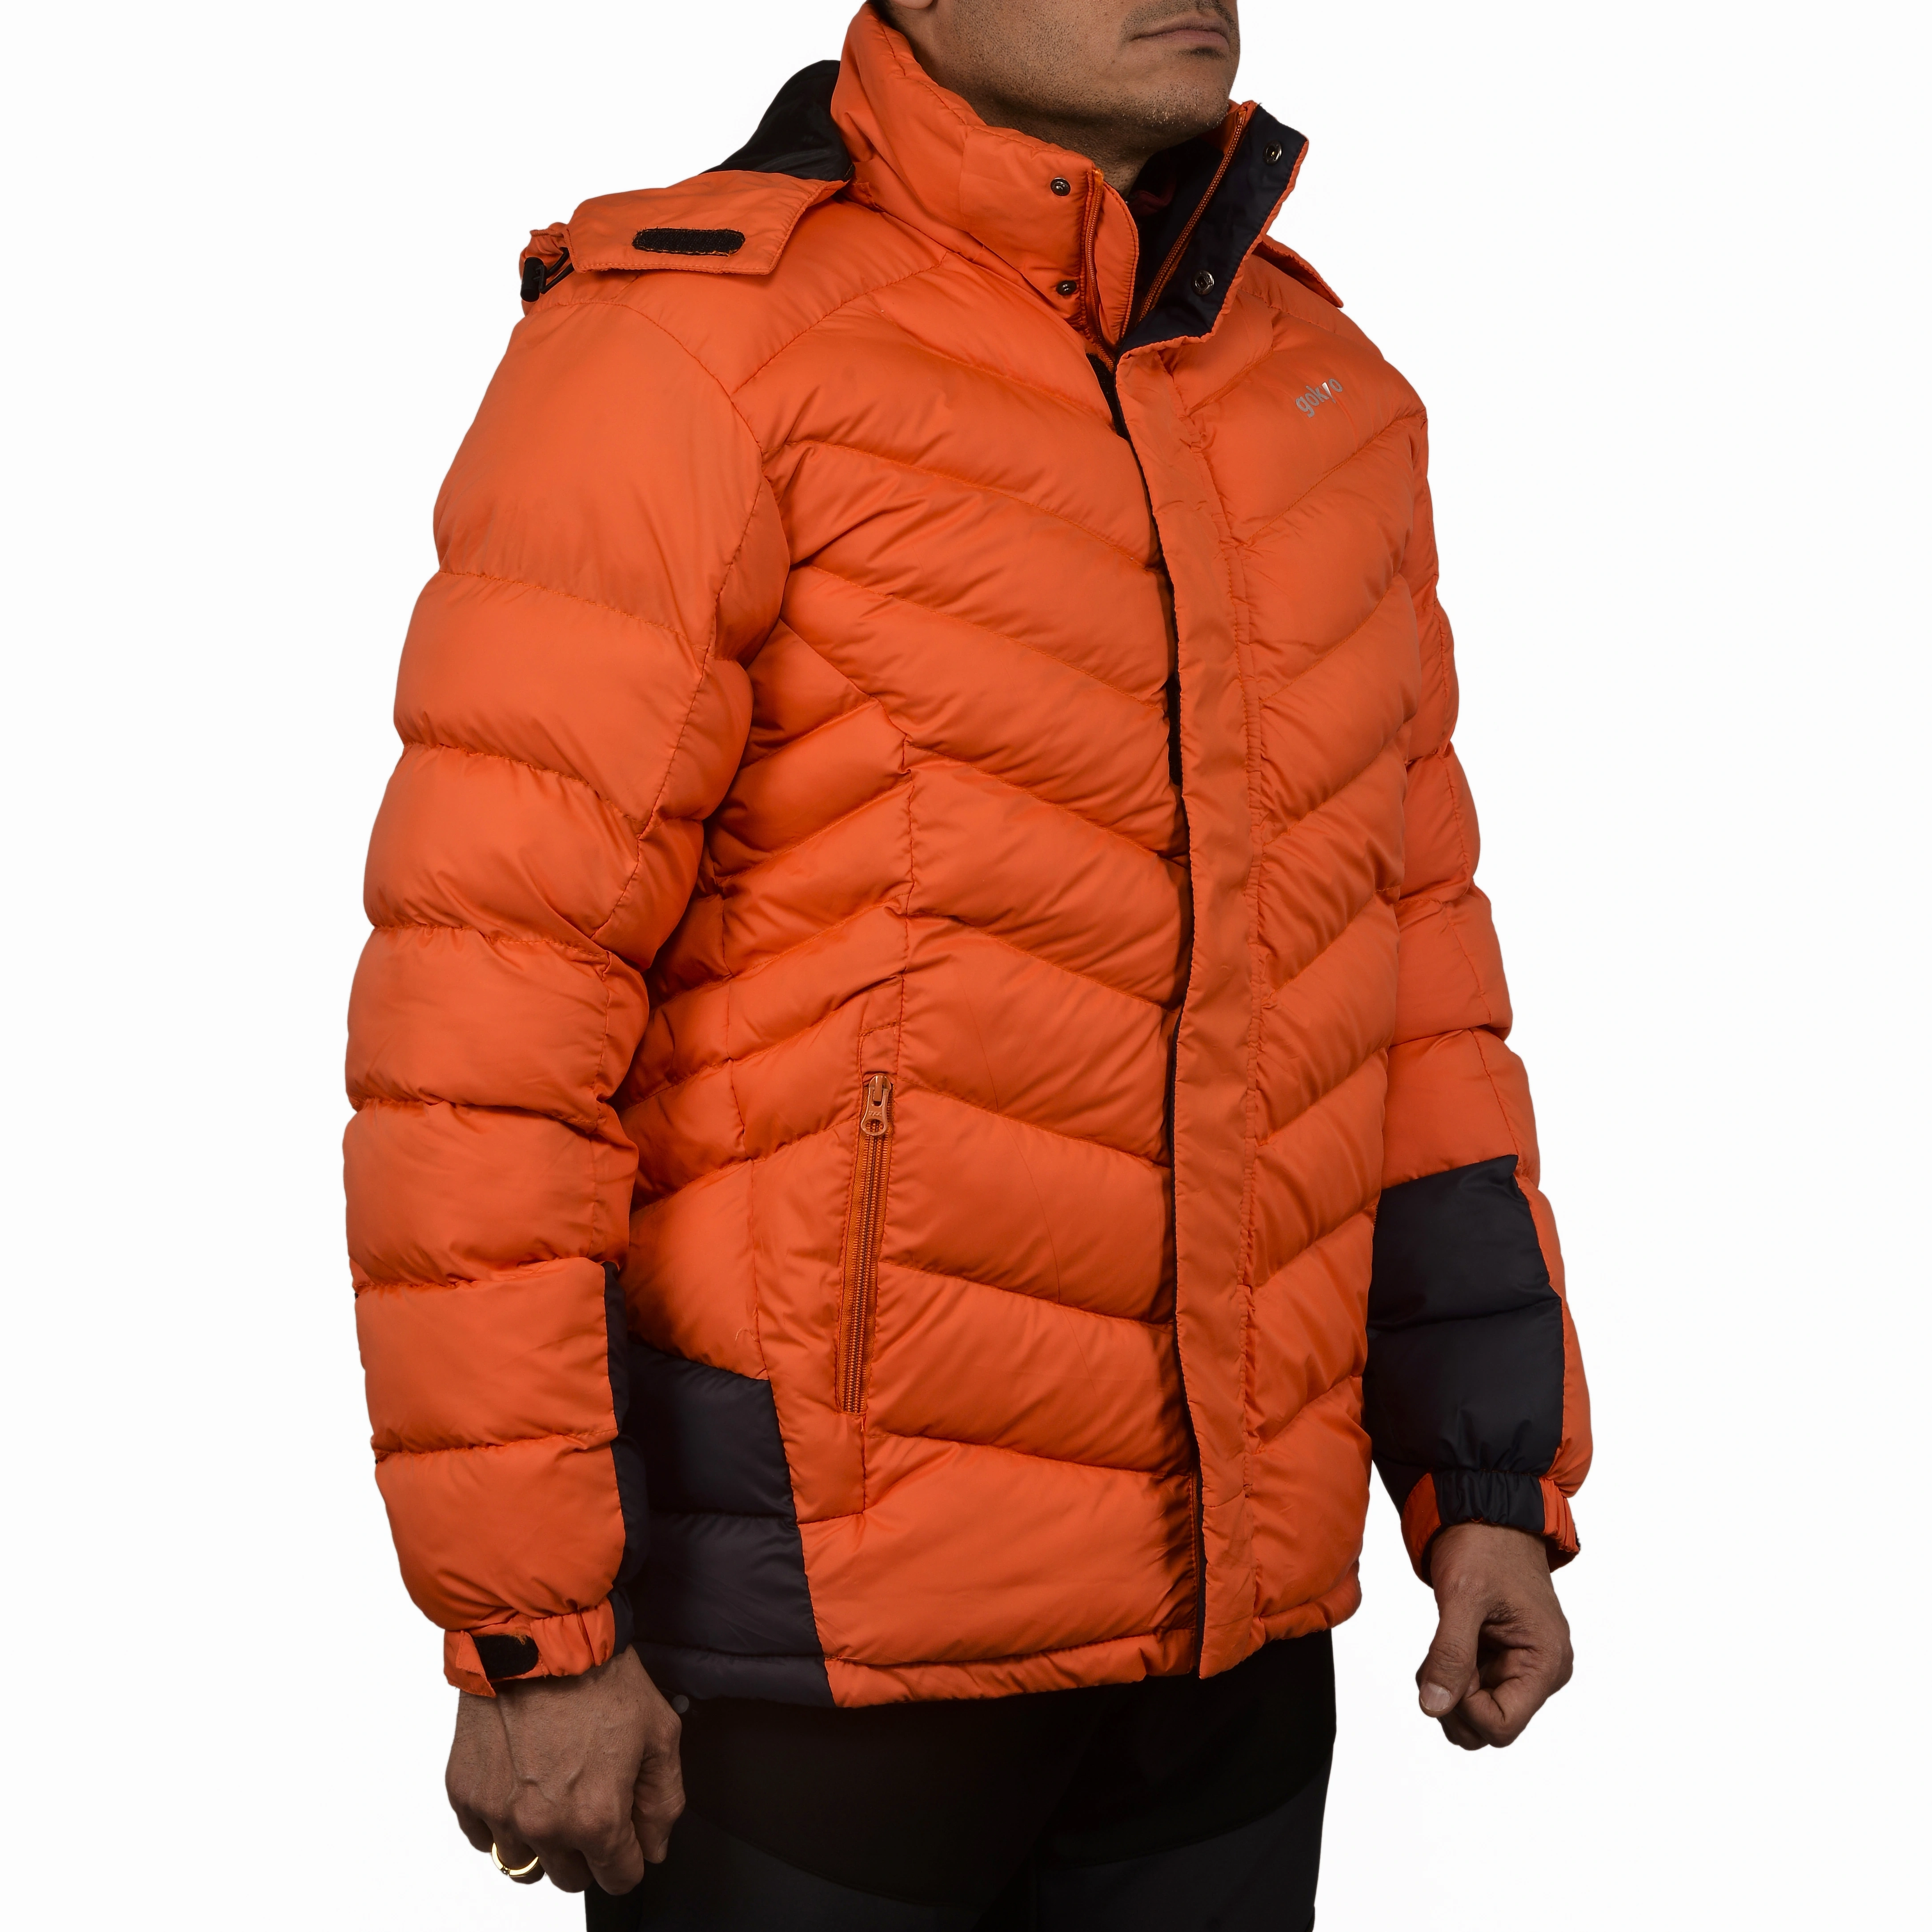 K2 Survivor Down Jacket for Men: Stylized Functionality for Extreme Cold Weather Expeditions (Up to -20°C)-4XL-Orange-1